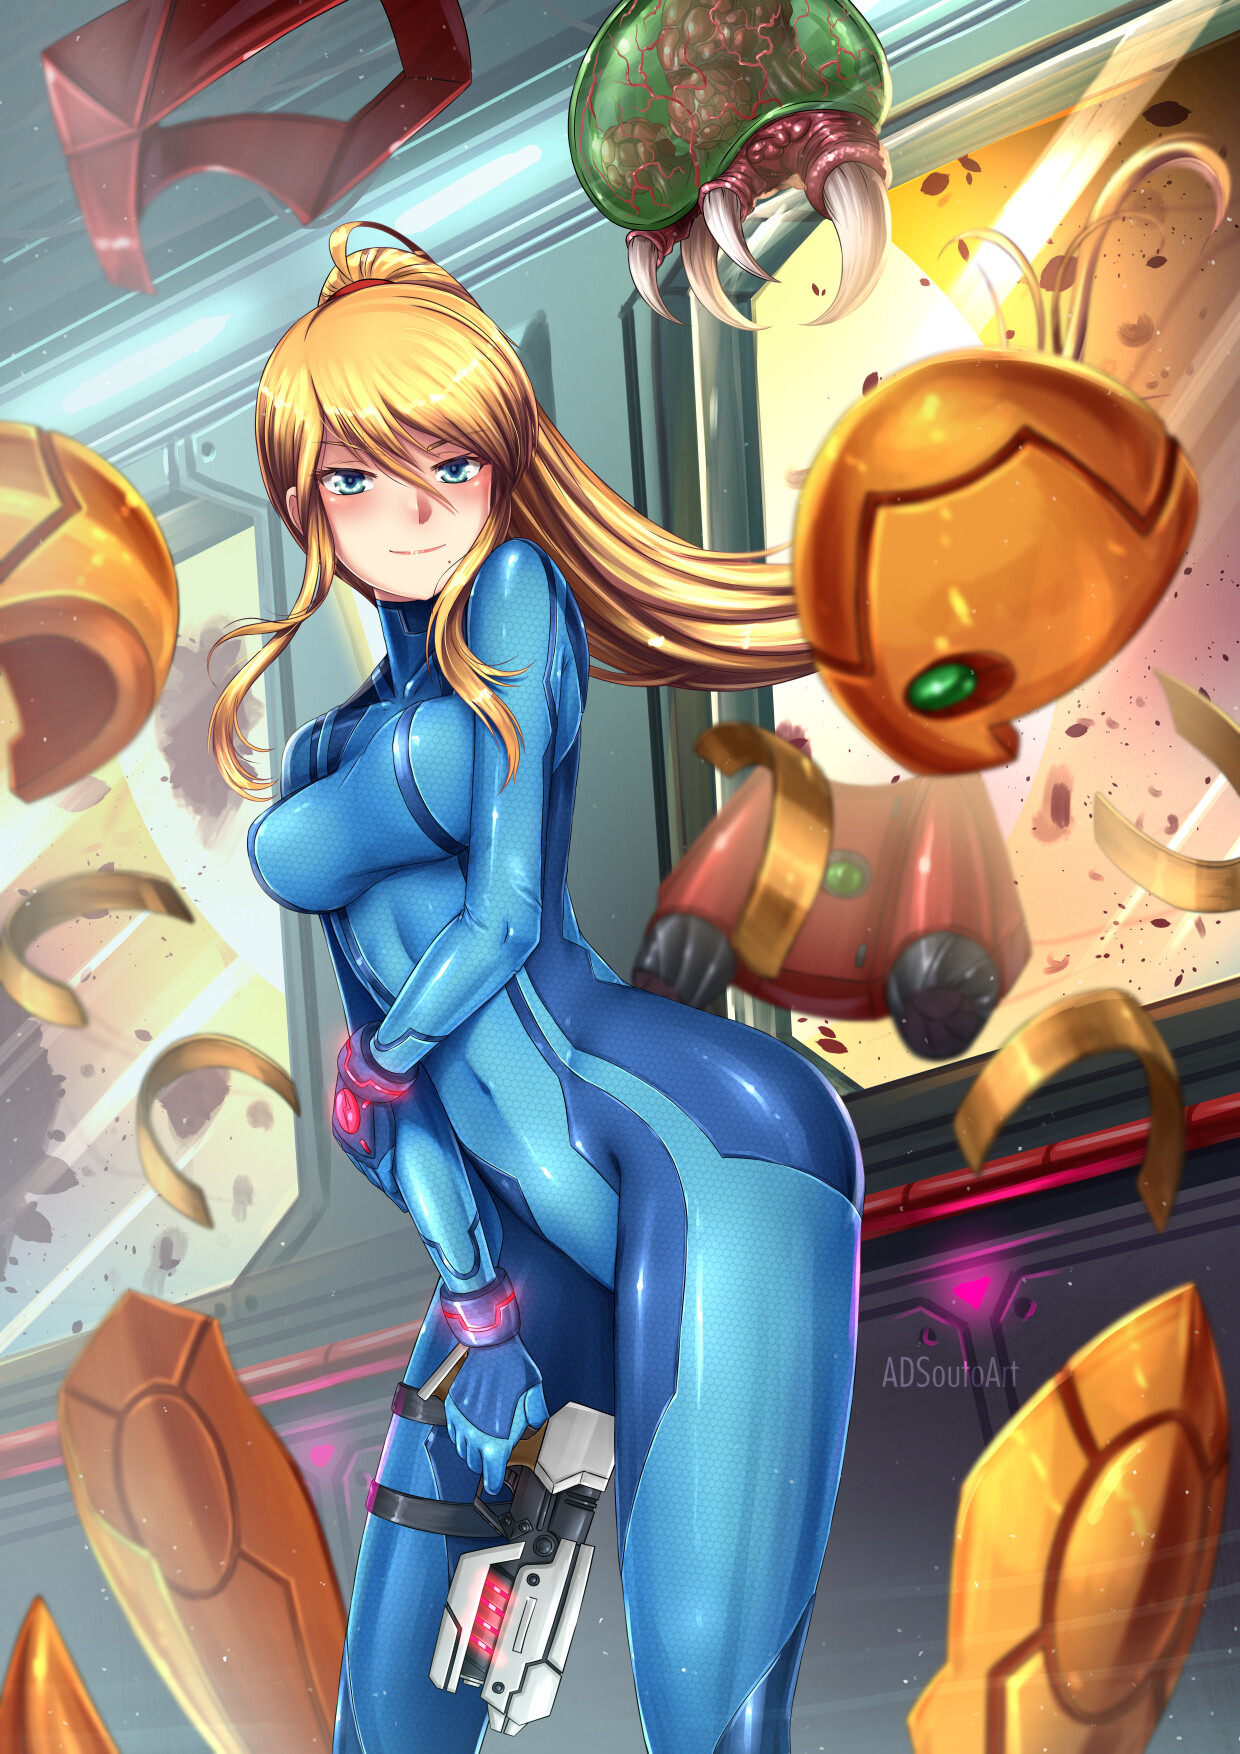 The intergalactic bounty hunter and the protagonist of the Metroid series.